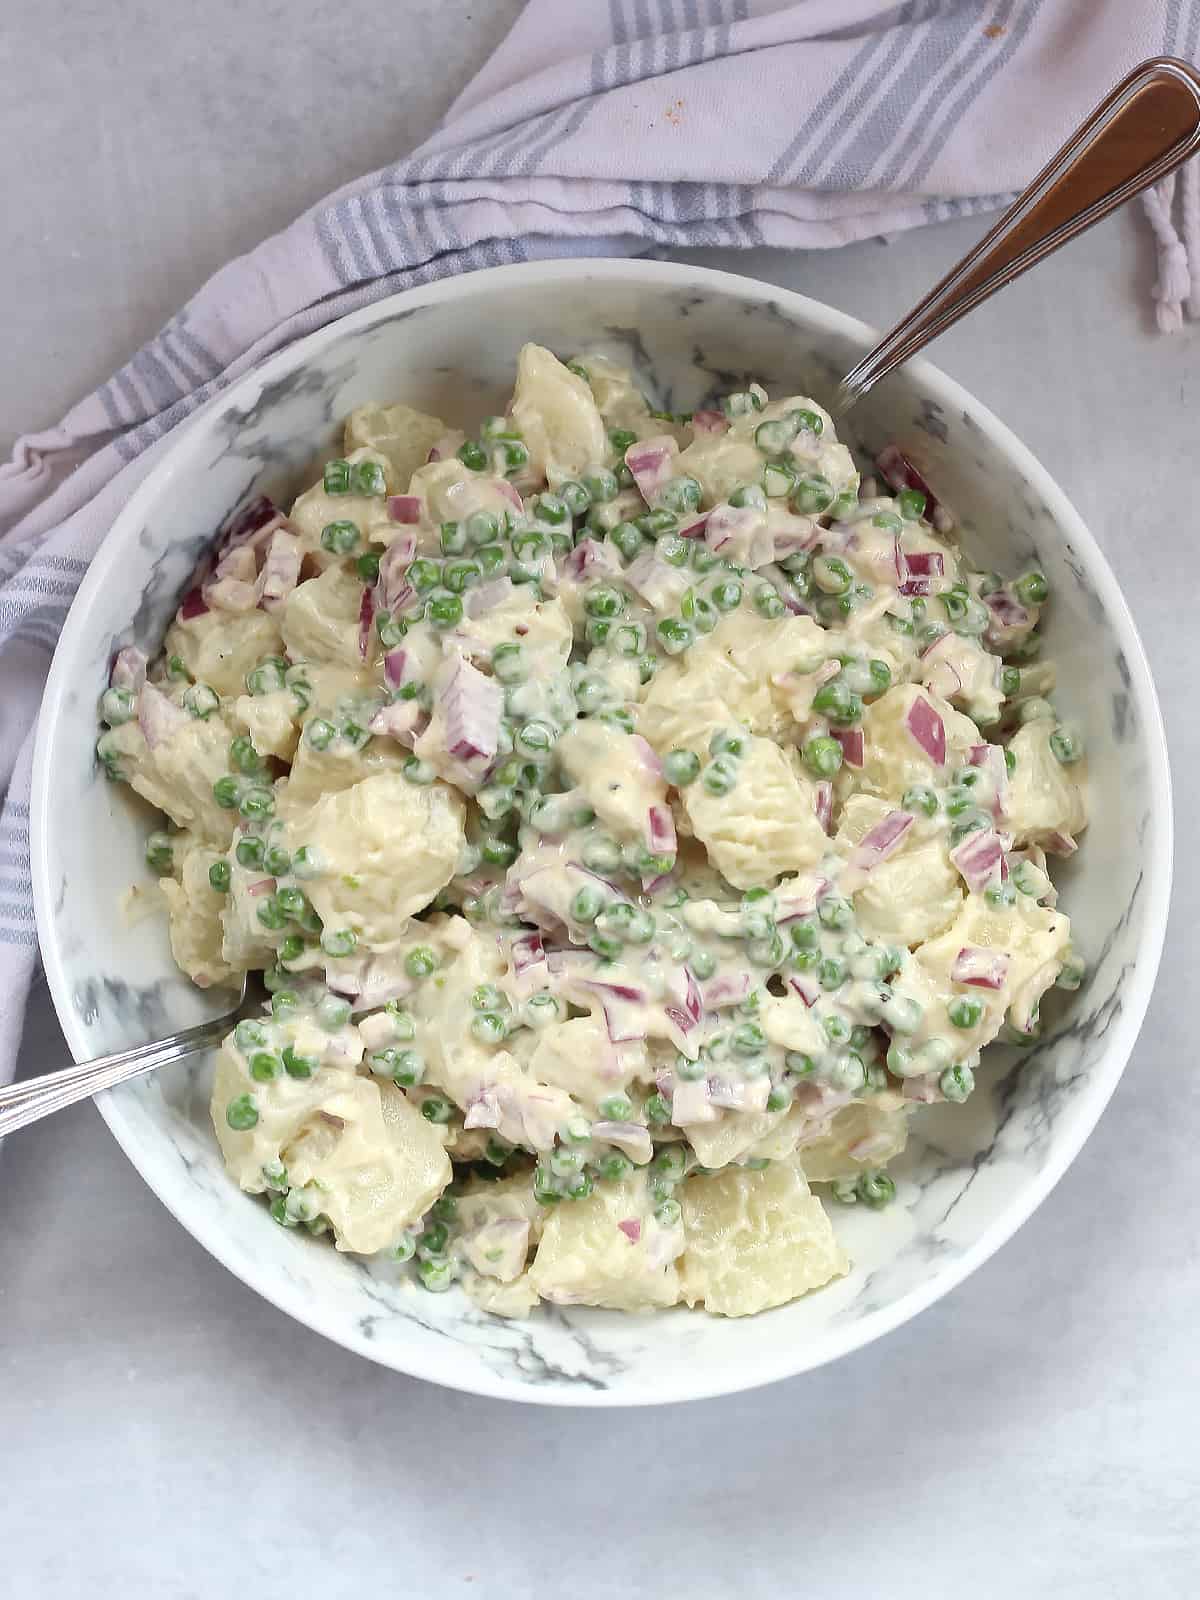 Creamy potato salad with green peas and red onions in a bowl with two spoons.